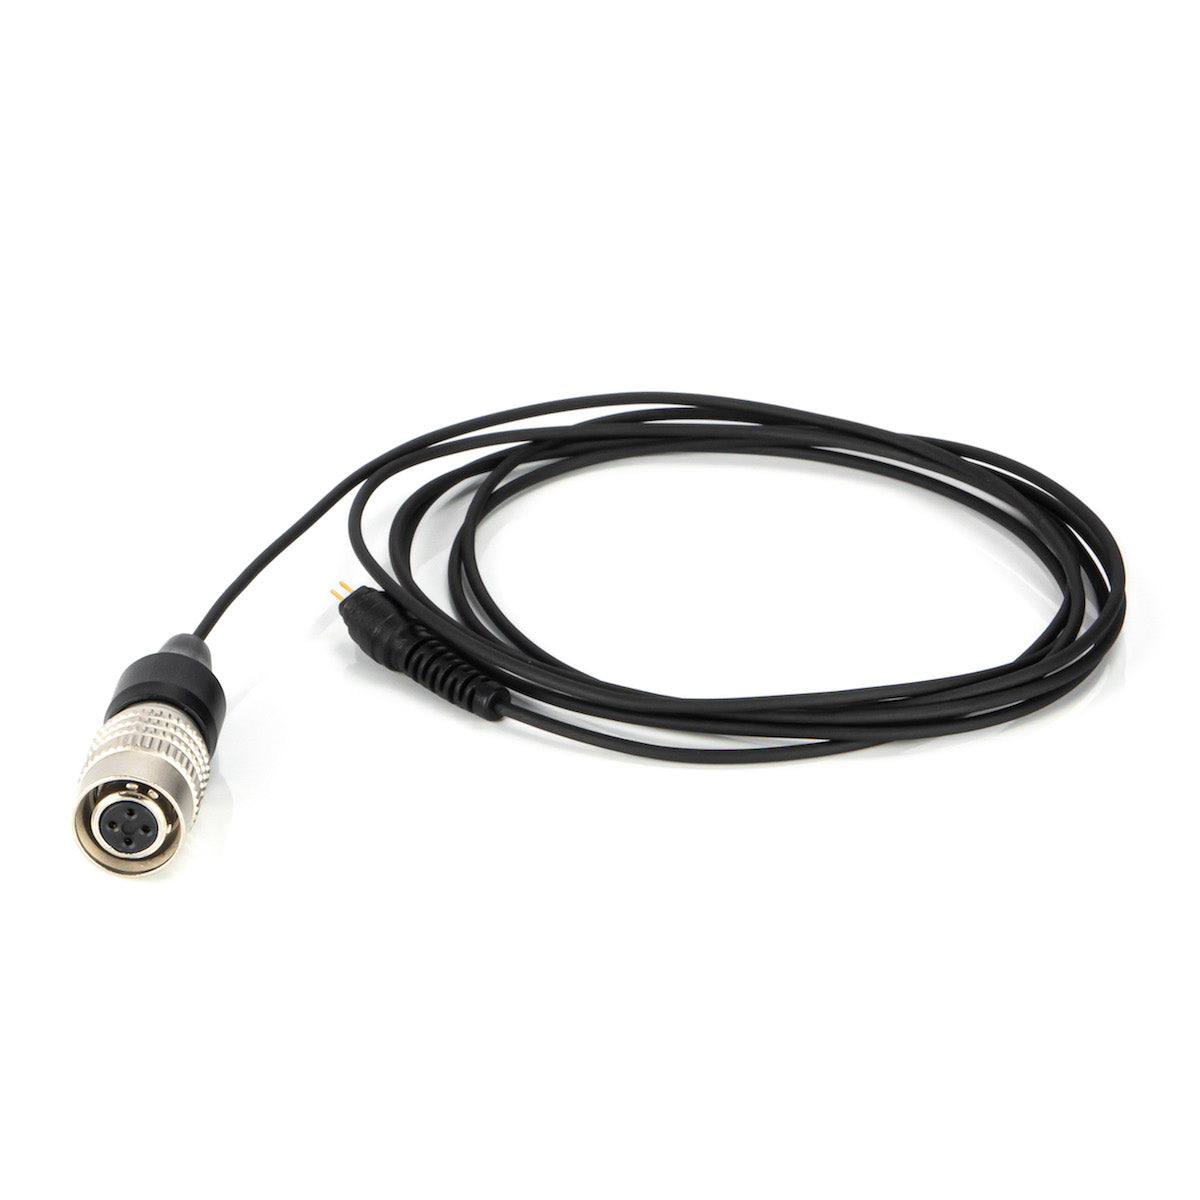 THOR Hammer SE Microphone Replacement Cable, Hilrose4 black